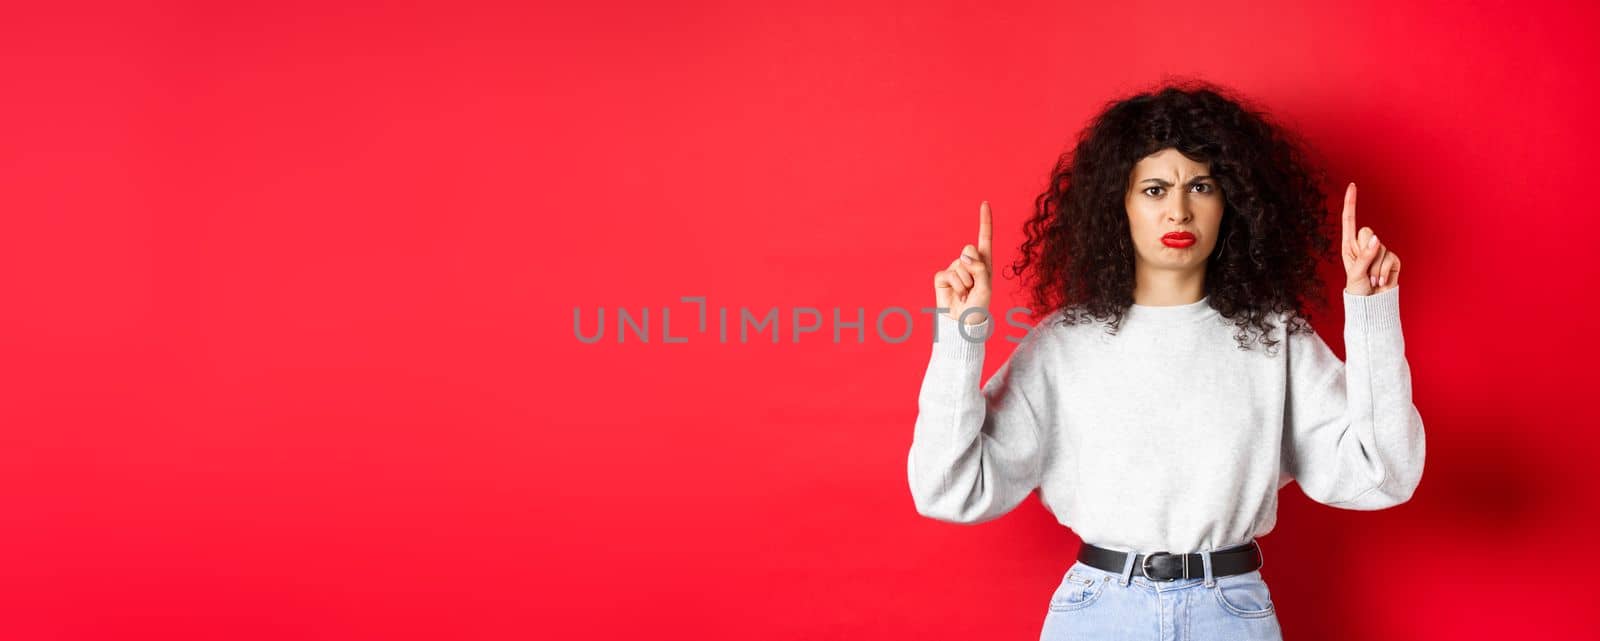 Grumpy young woman with curly hair frowning and grimacing unsatisfied, pointing fingers up at something bad, complaining on company, red background.